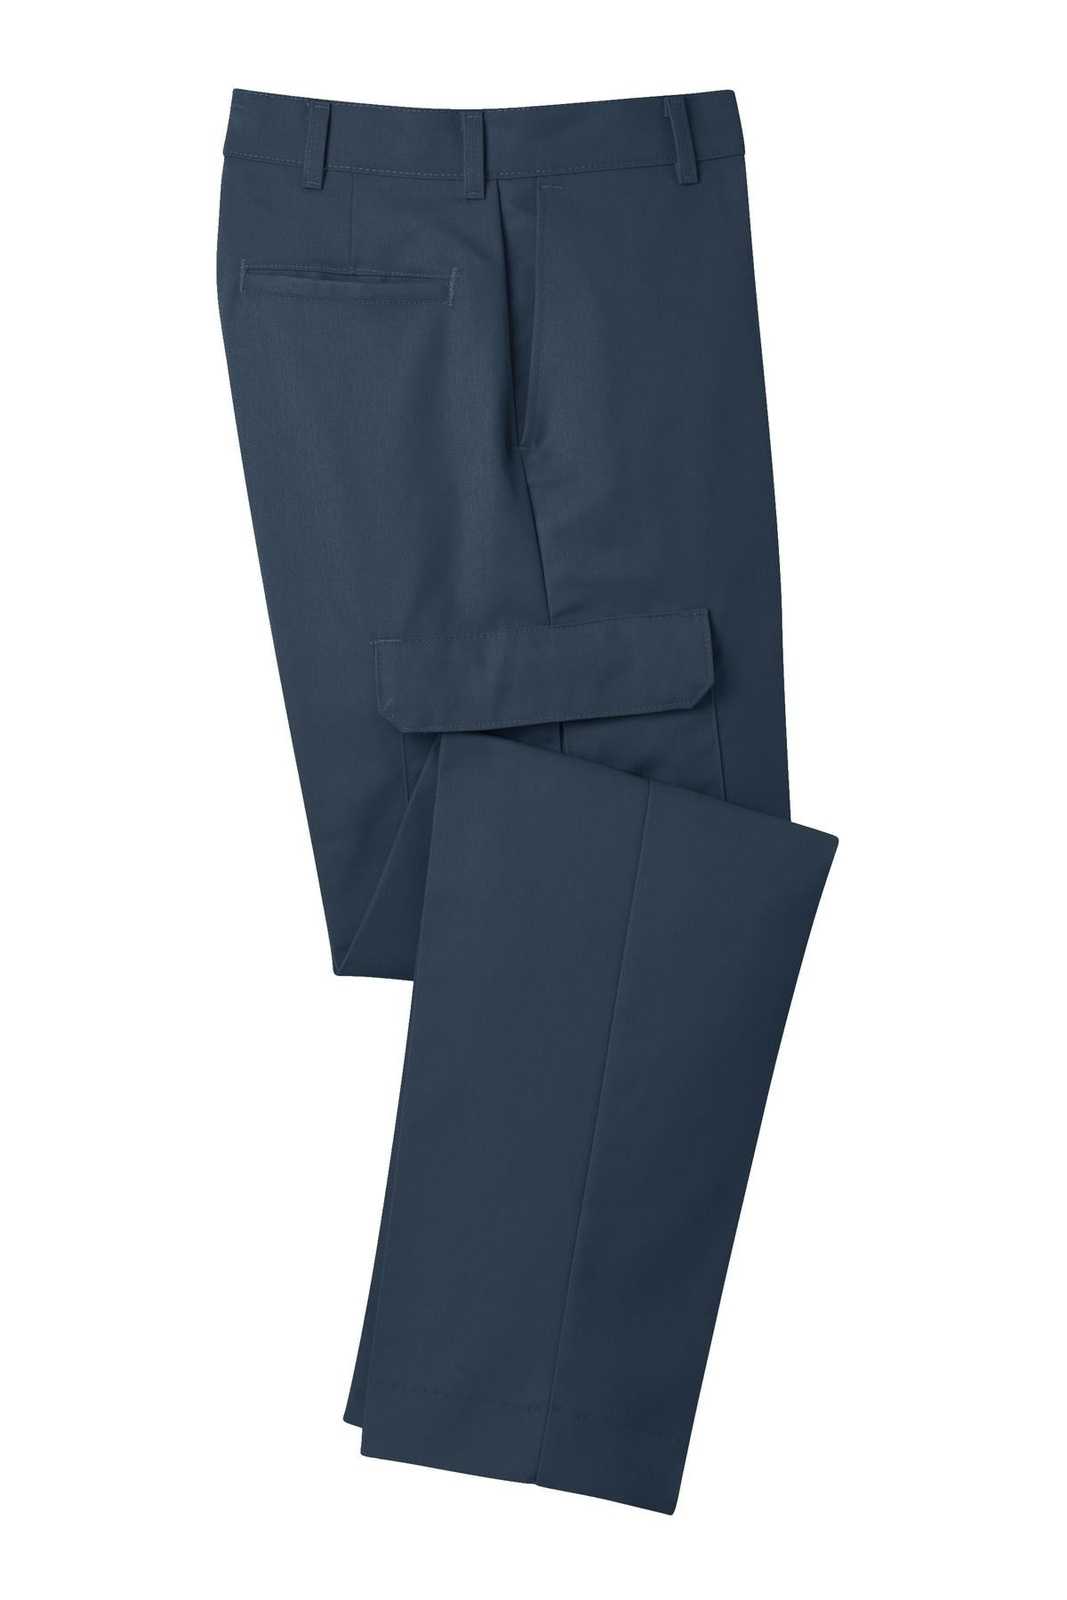 Red Kap PT88 Industrial Cargo Pant - Navy - HIT a Double - 3